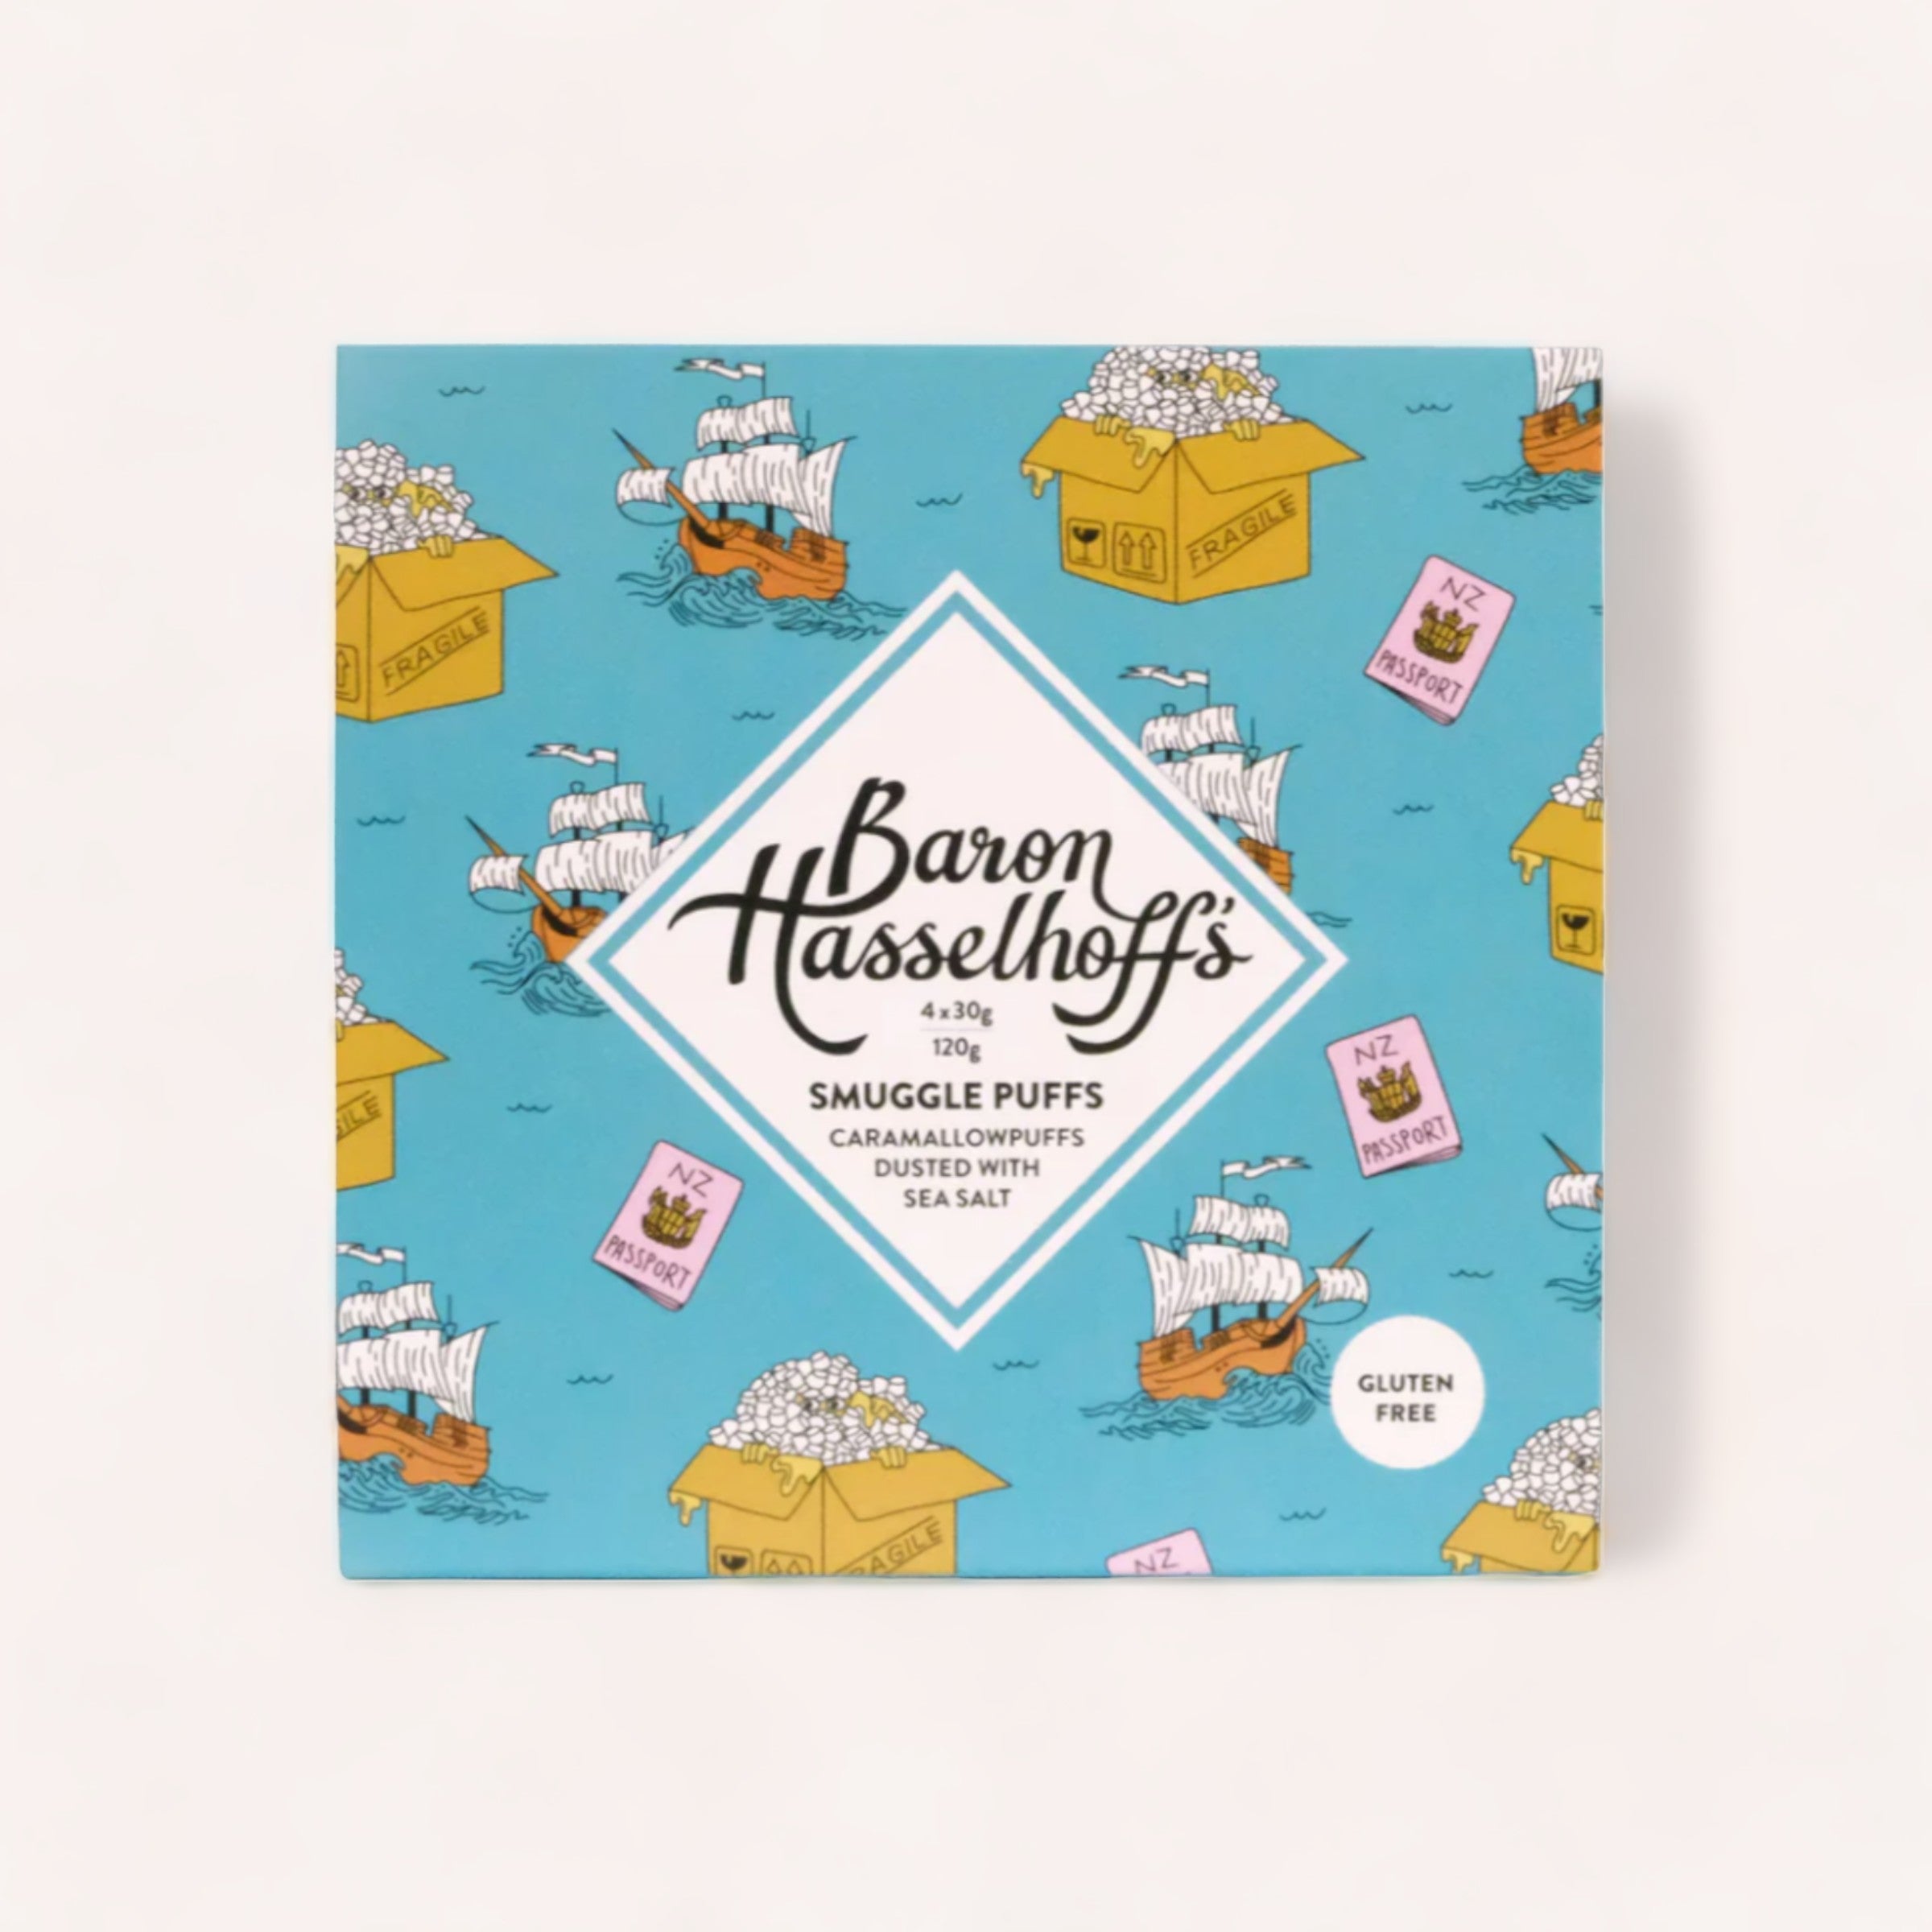 A square snack package featuring a whimsical sea-themed illustration. It's labeled "Salted Caramel Mallow Puffs by Baron Hasselhoff's," with indications of being gluten free and flavored with salted caramel.